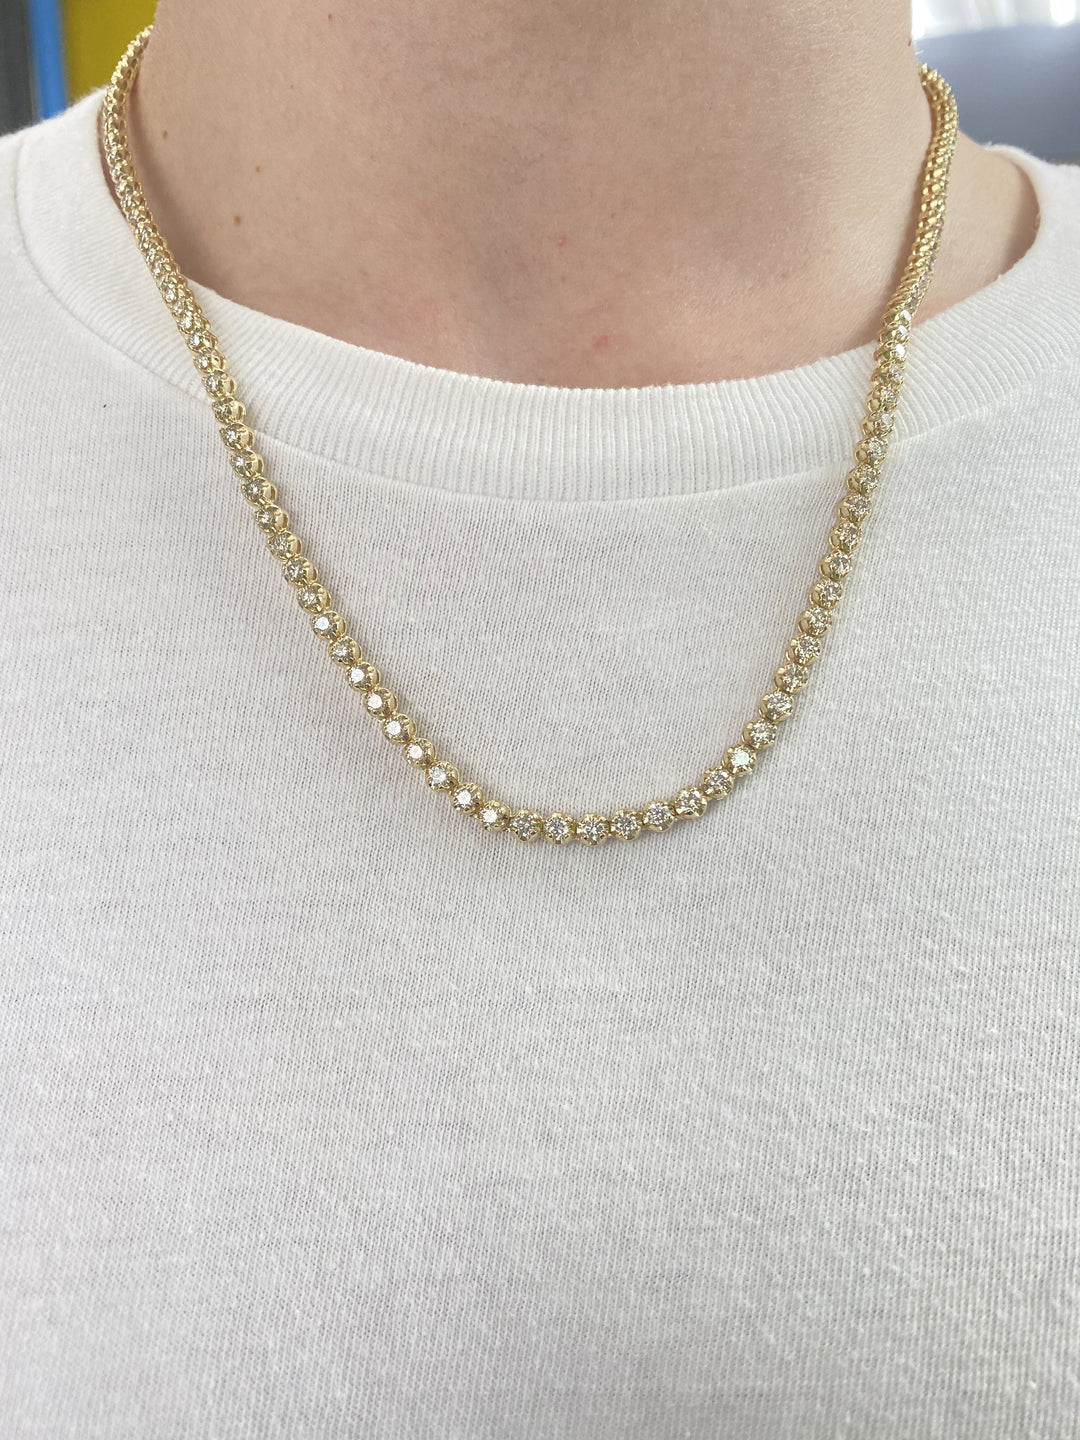 tennis-necklace-chain-in-yellow-gold